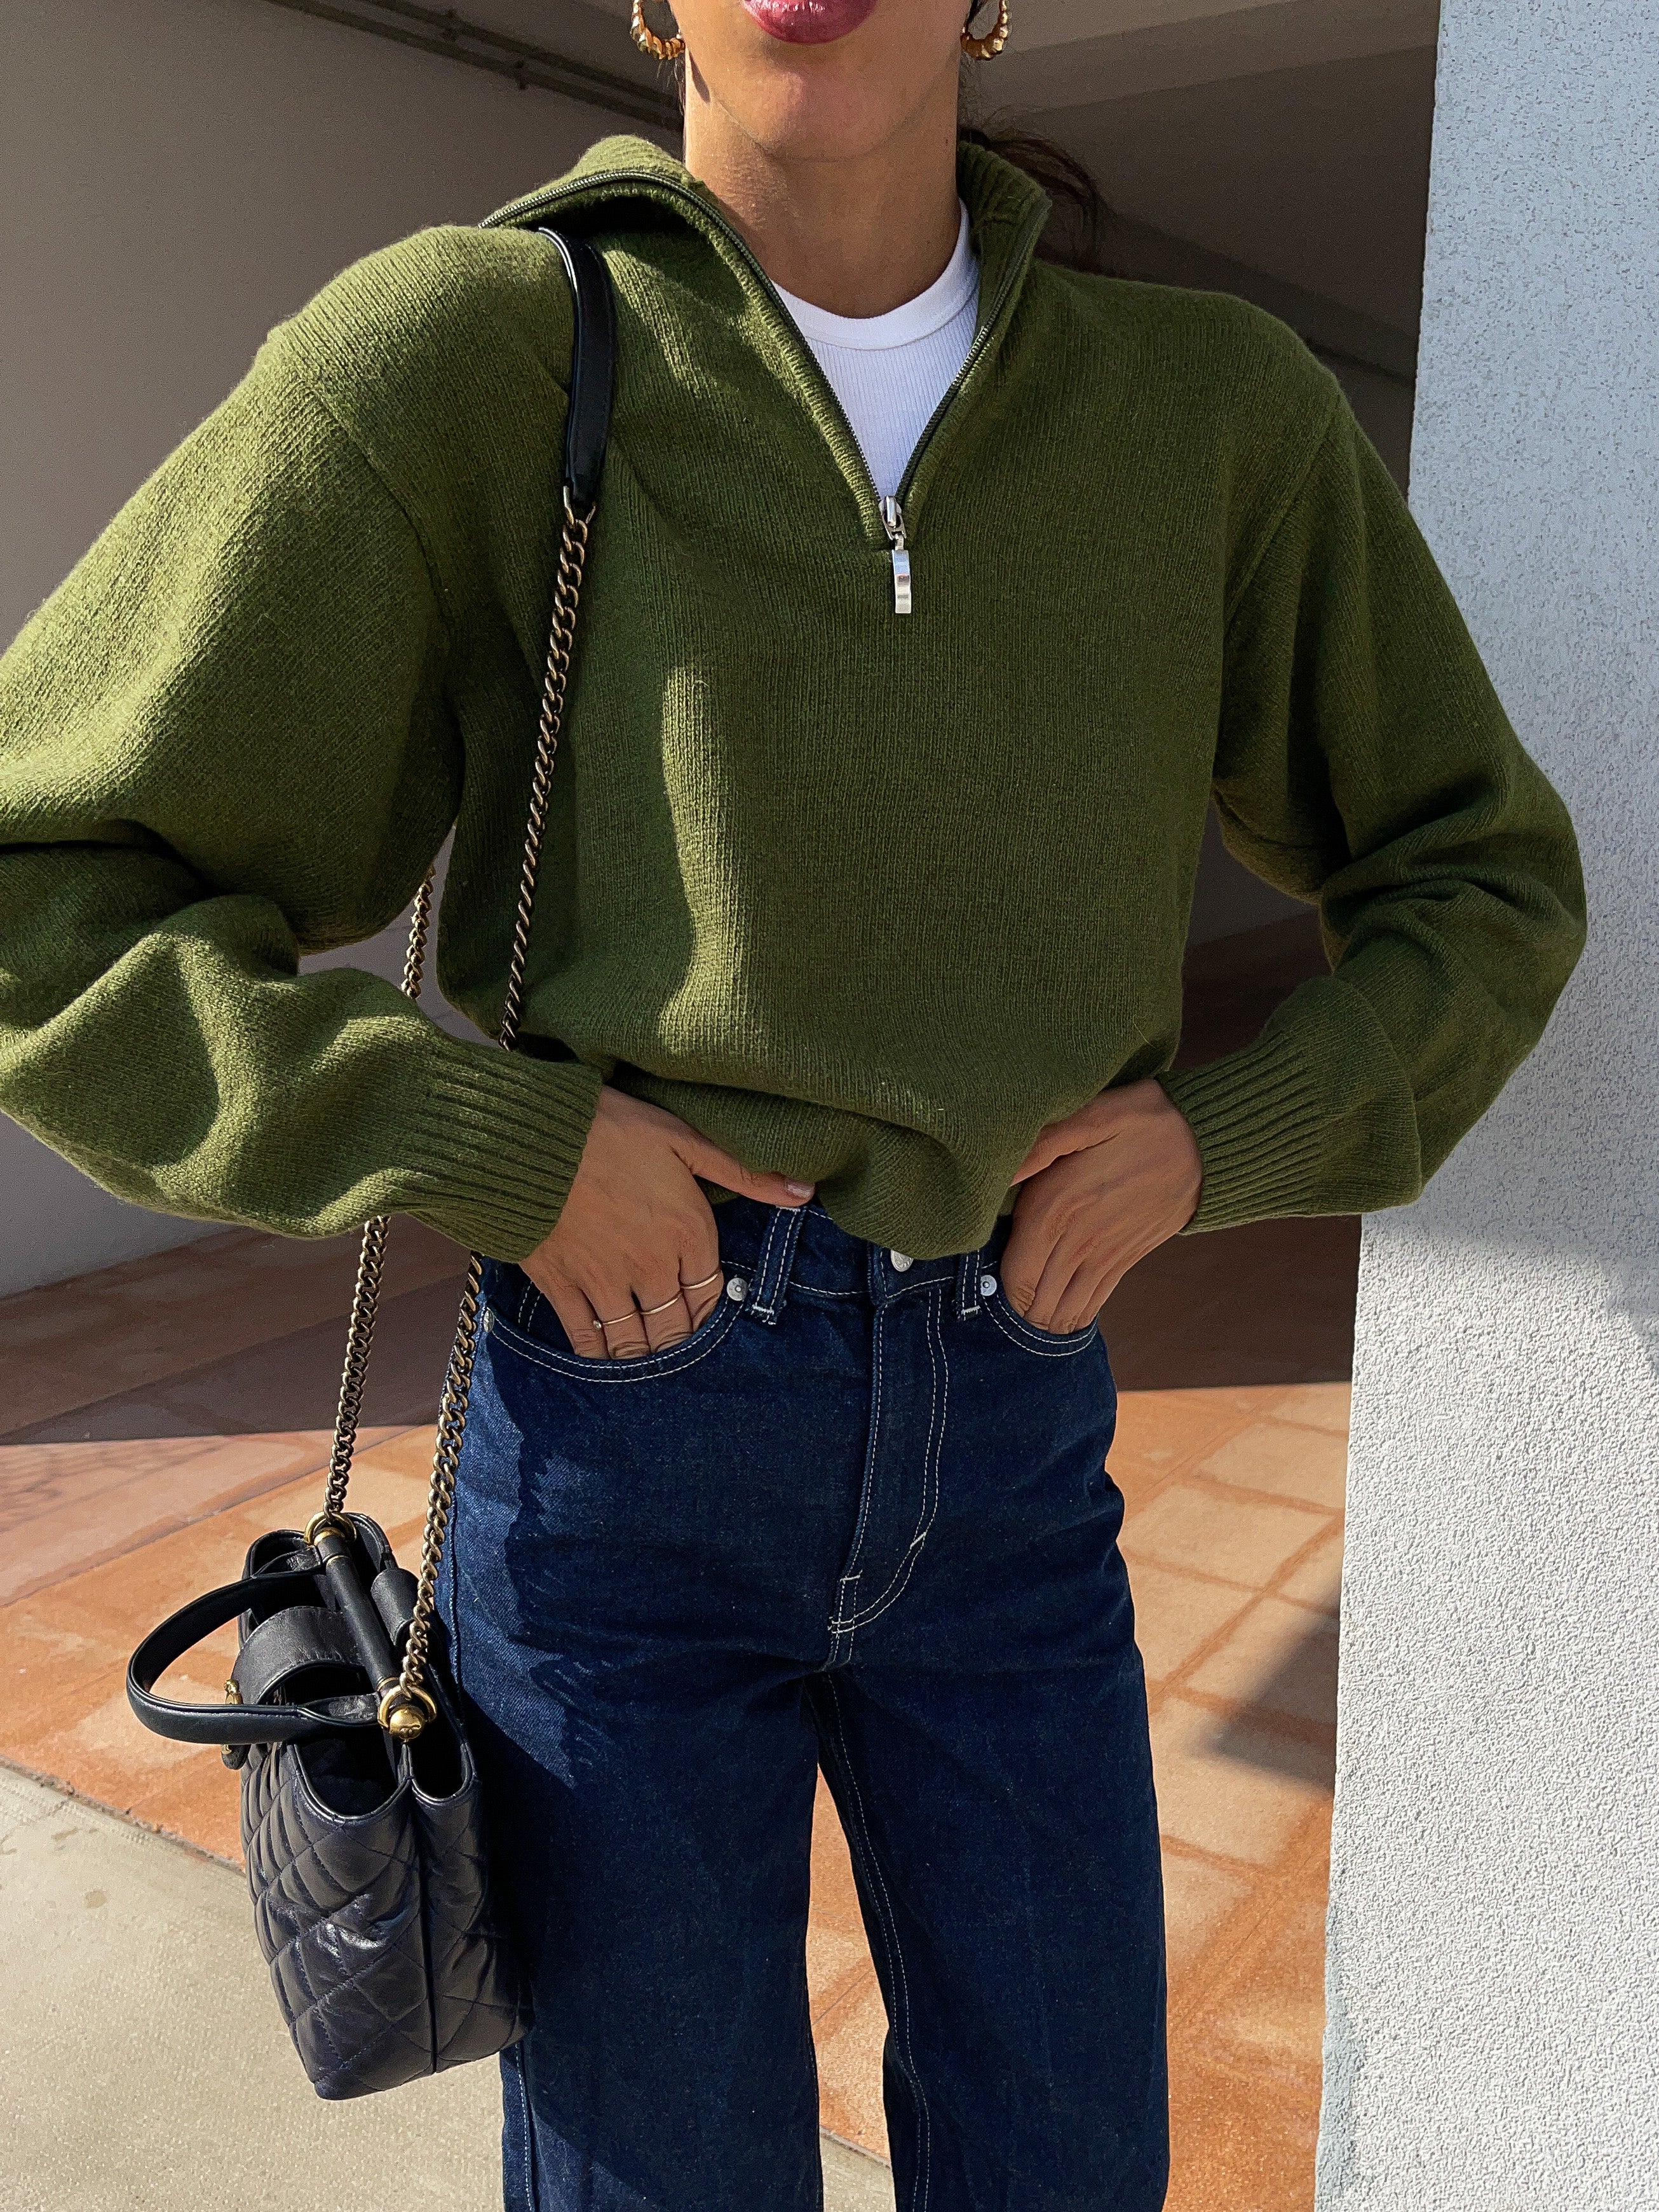 Olive green sweater